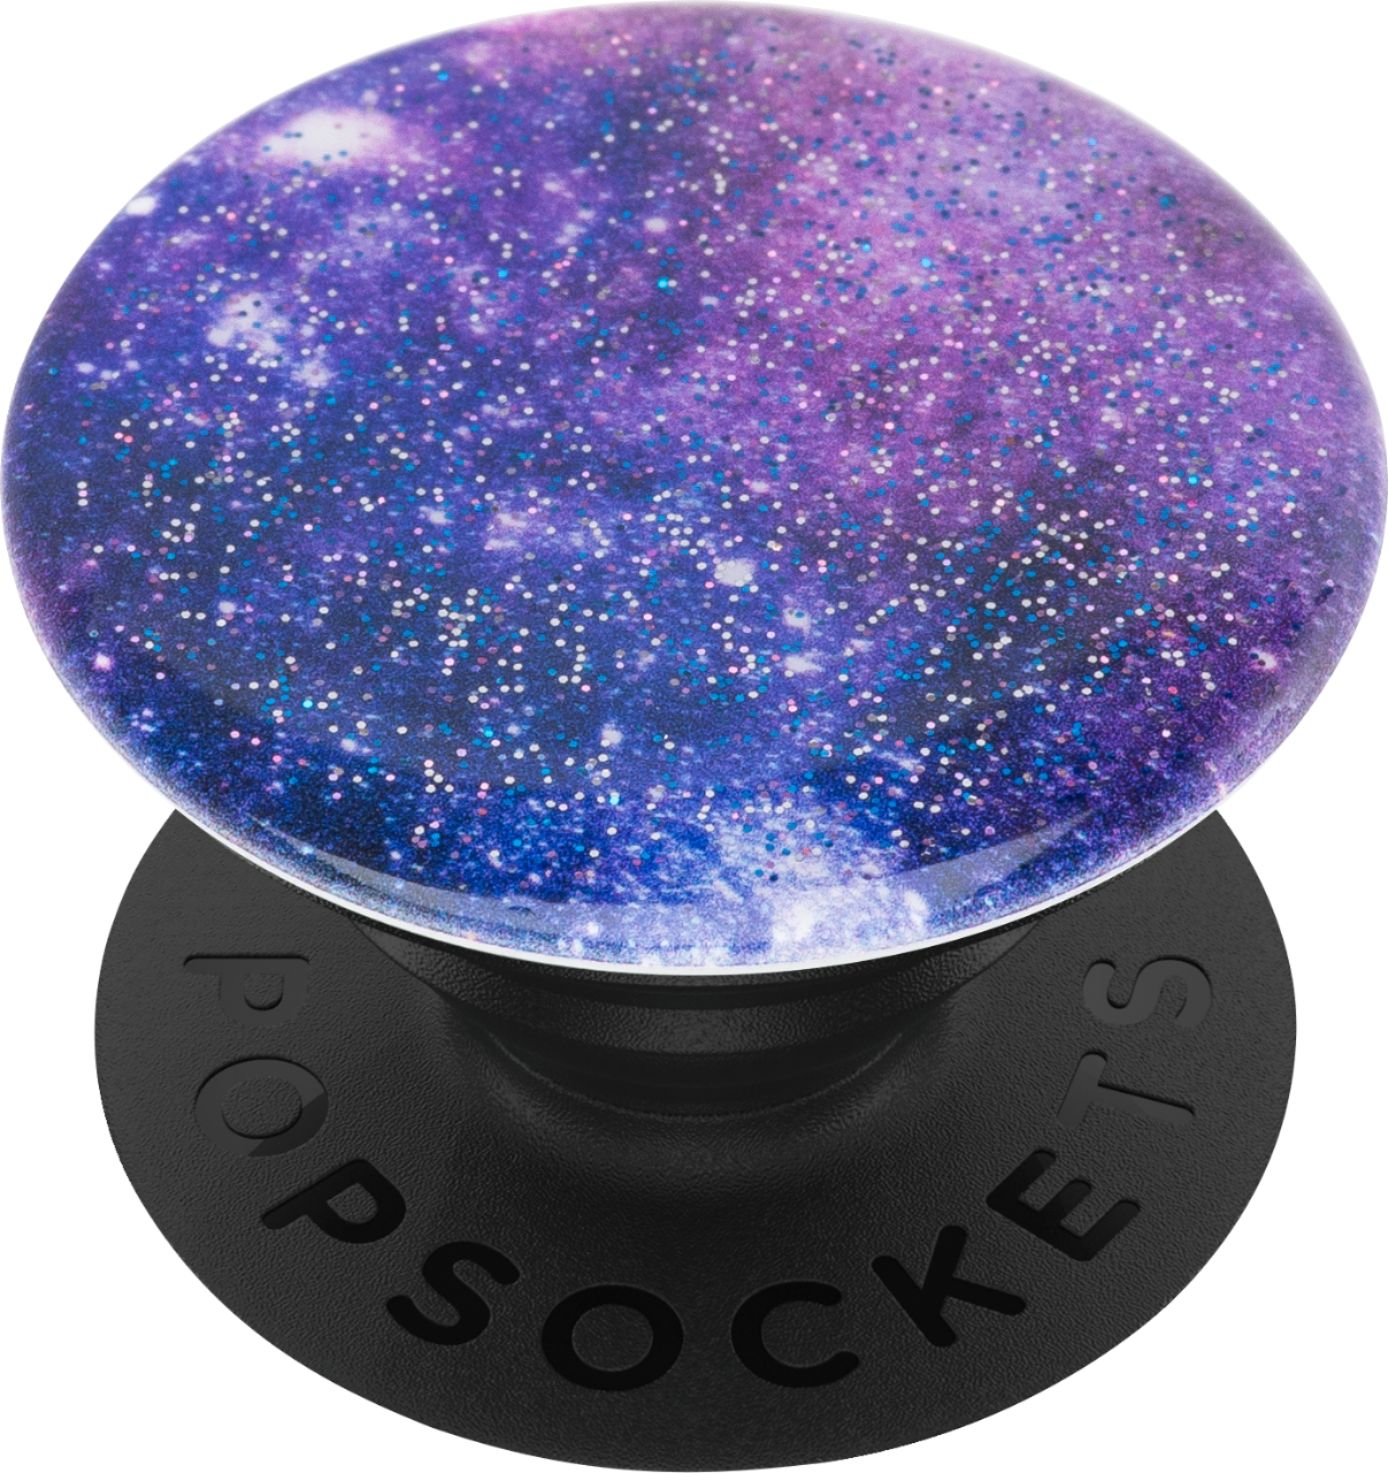 The 5 best PopSockets of 2022